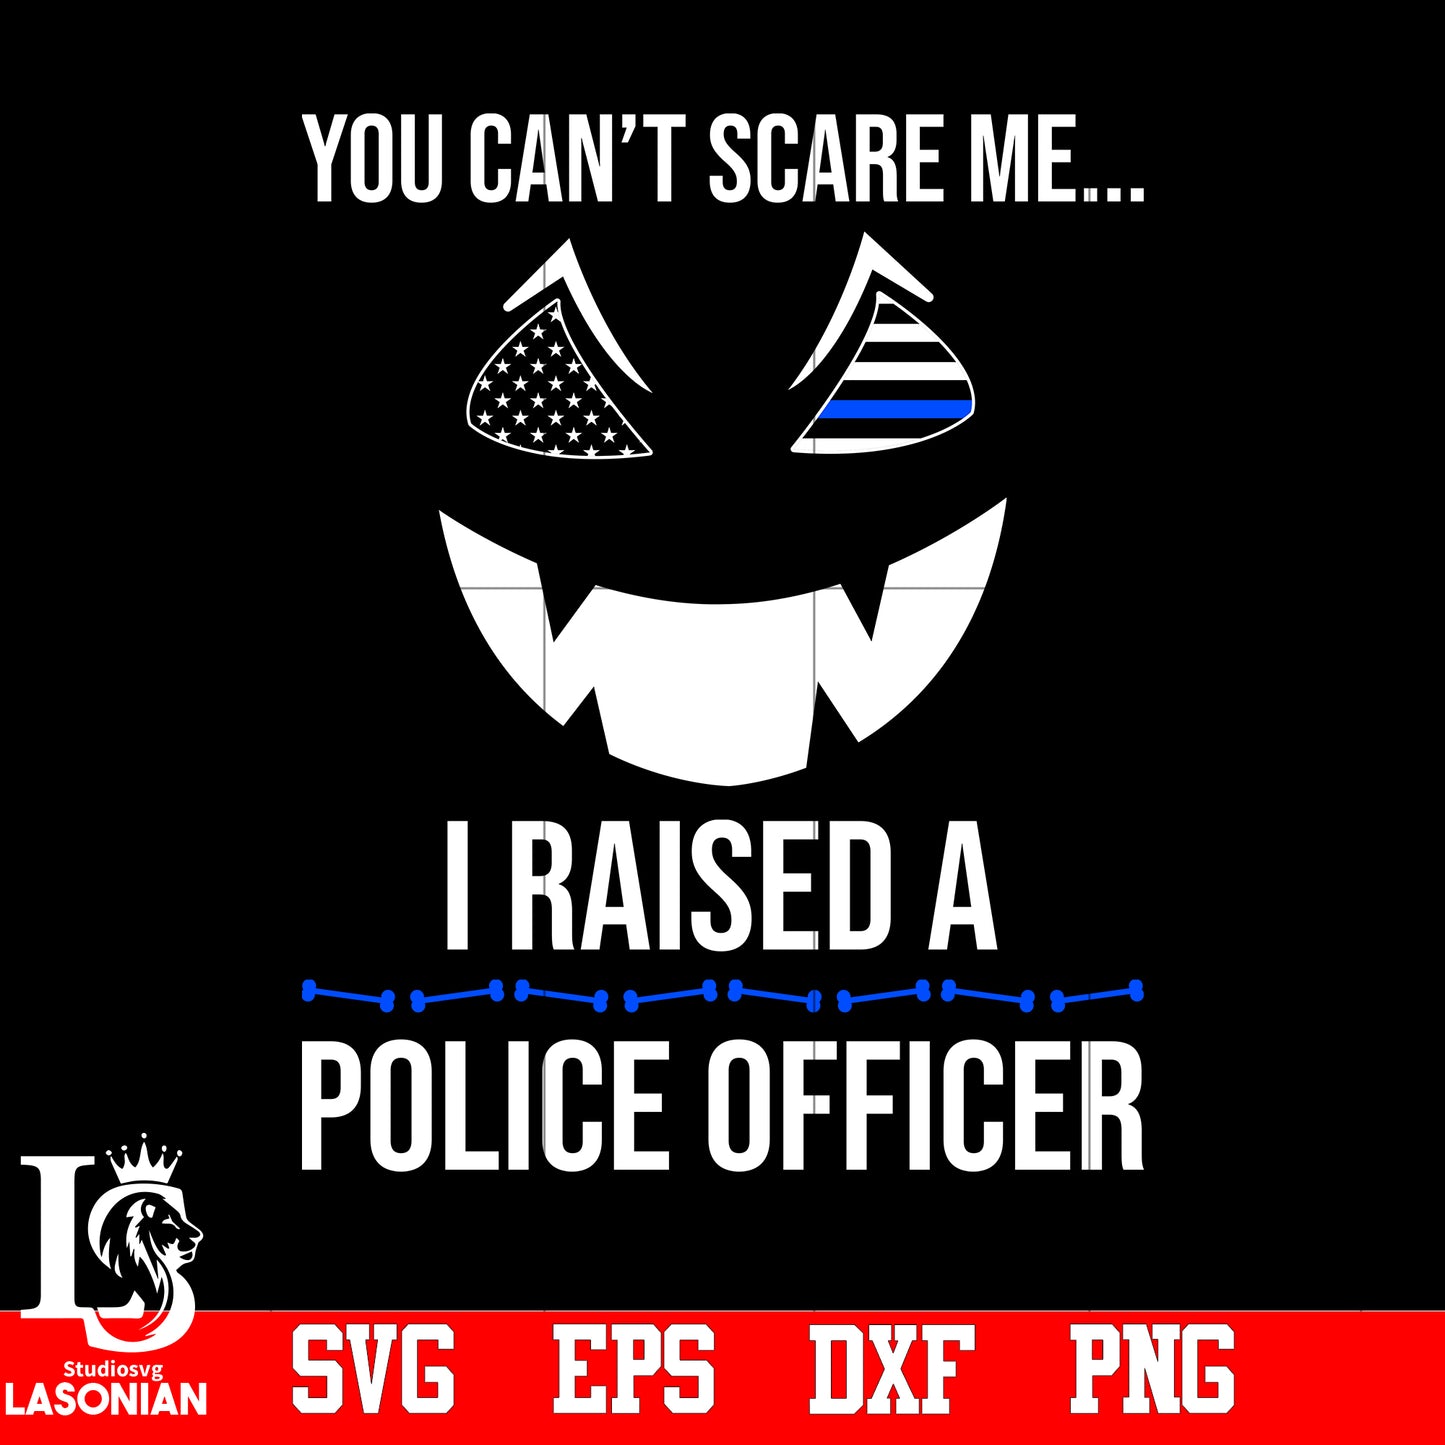 You Can't Scare Me... I Raisef A Police Officer svg,eps,dxf,png file